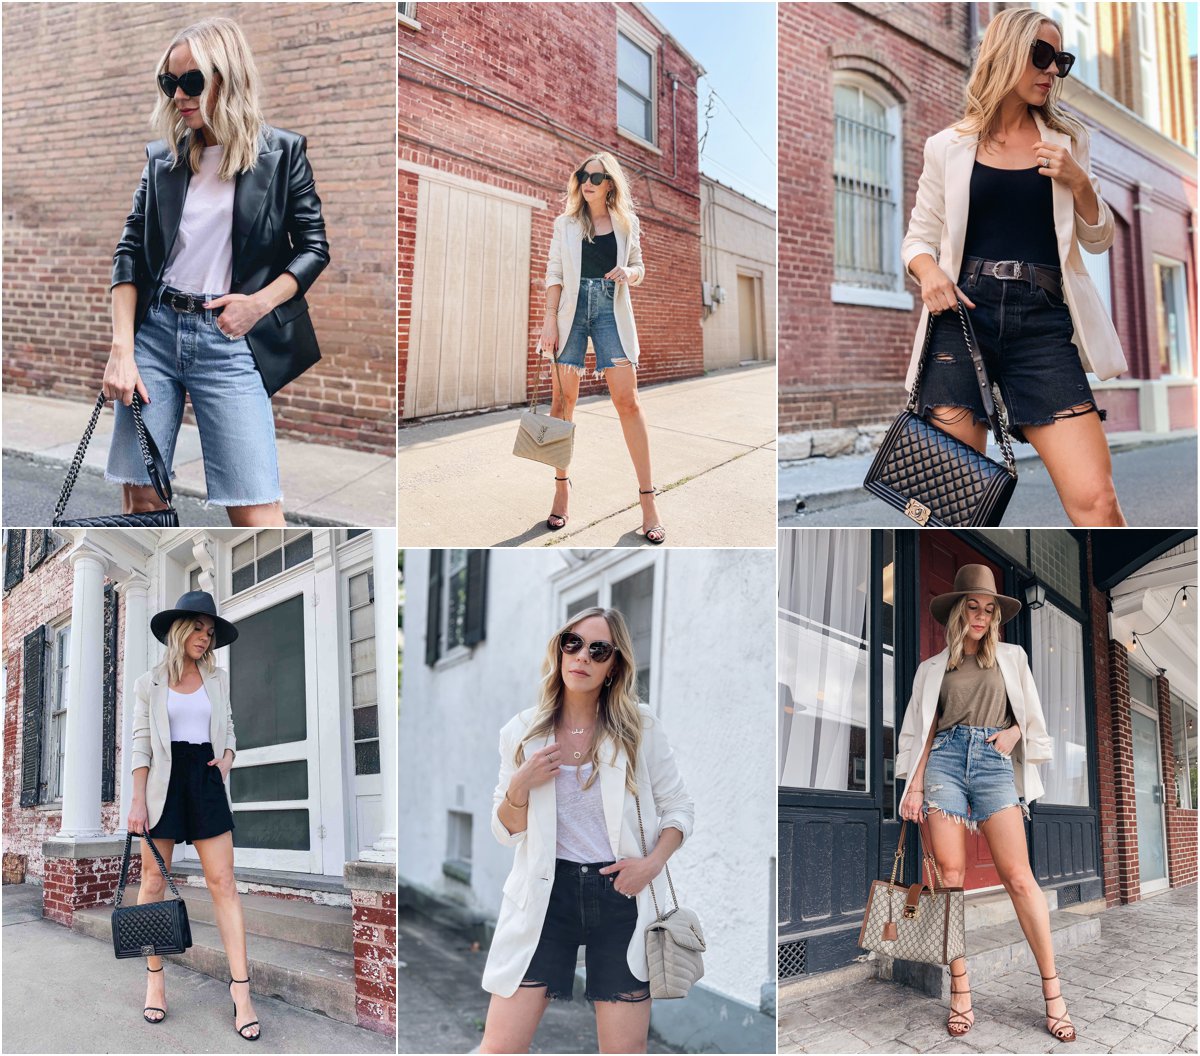 Style Black Shorts With a Bodysuit, Oversize Blazer, and Strappy Black  Heels, This Is How to Wear a Blazer With Your Favourite Pair of Shorts